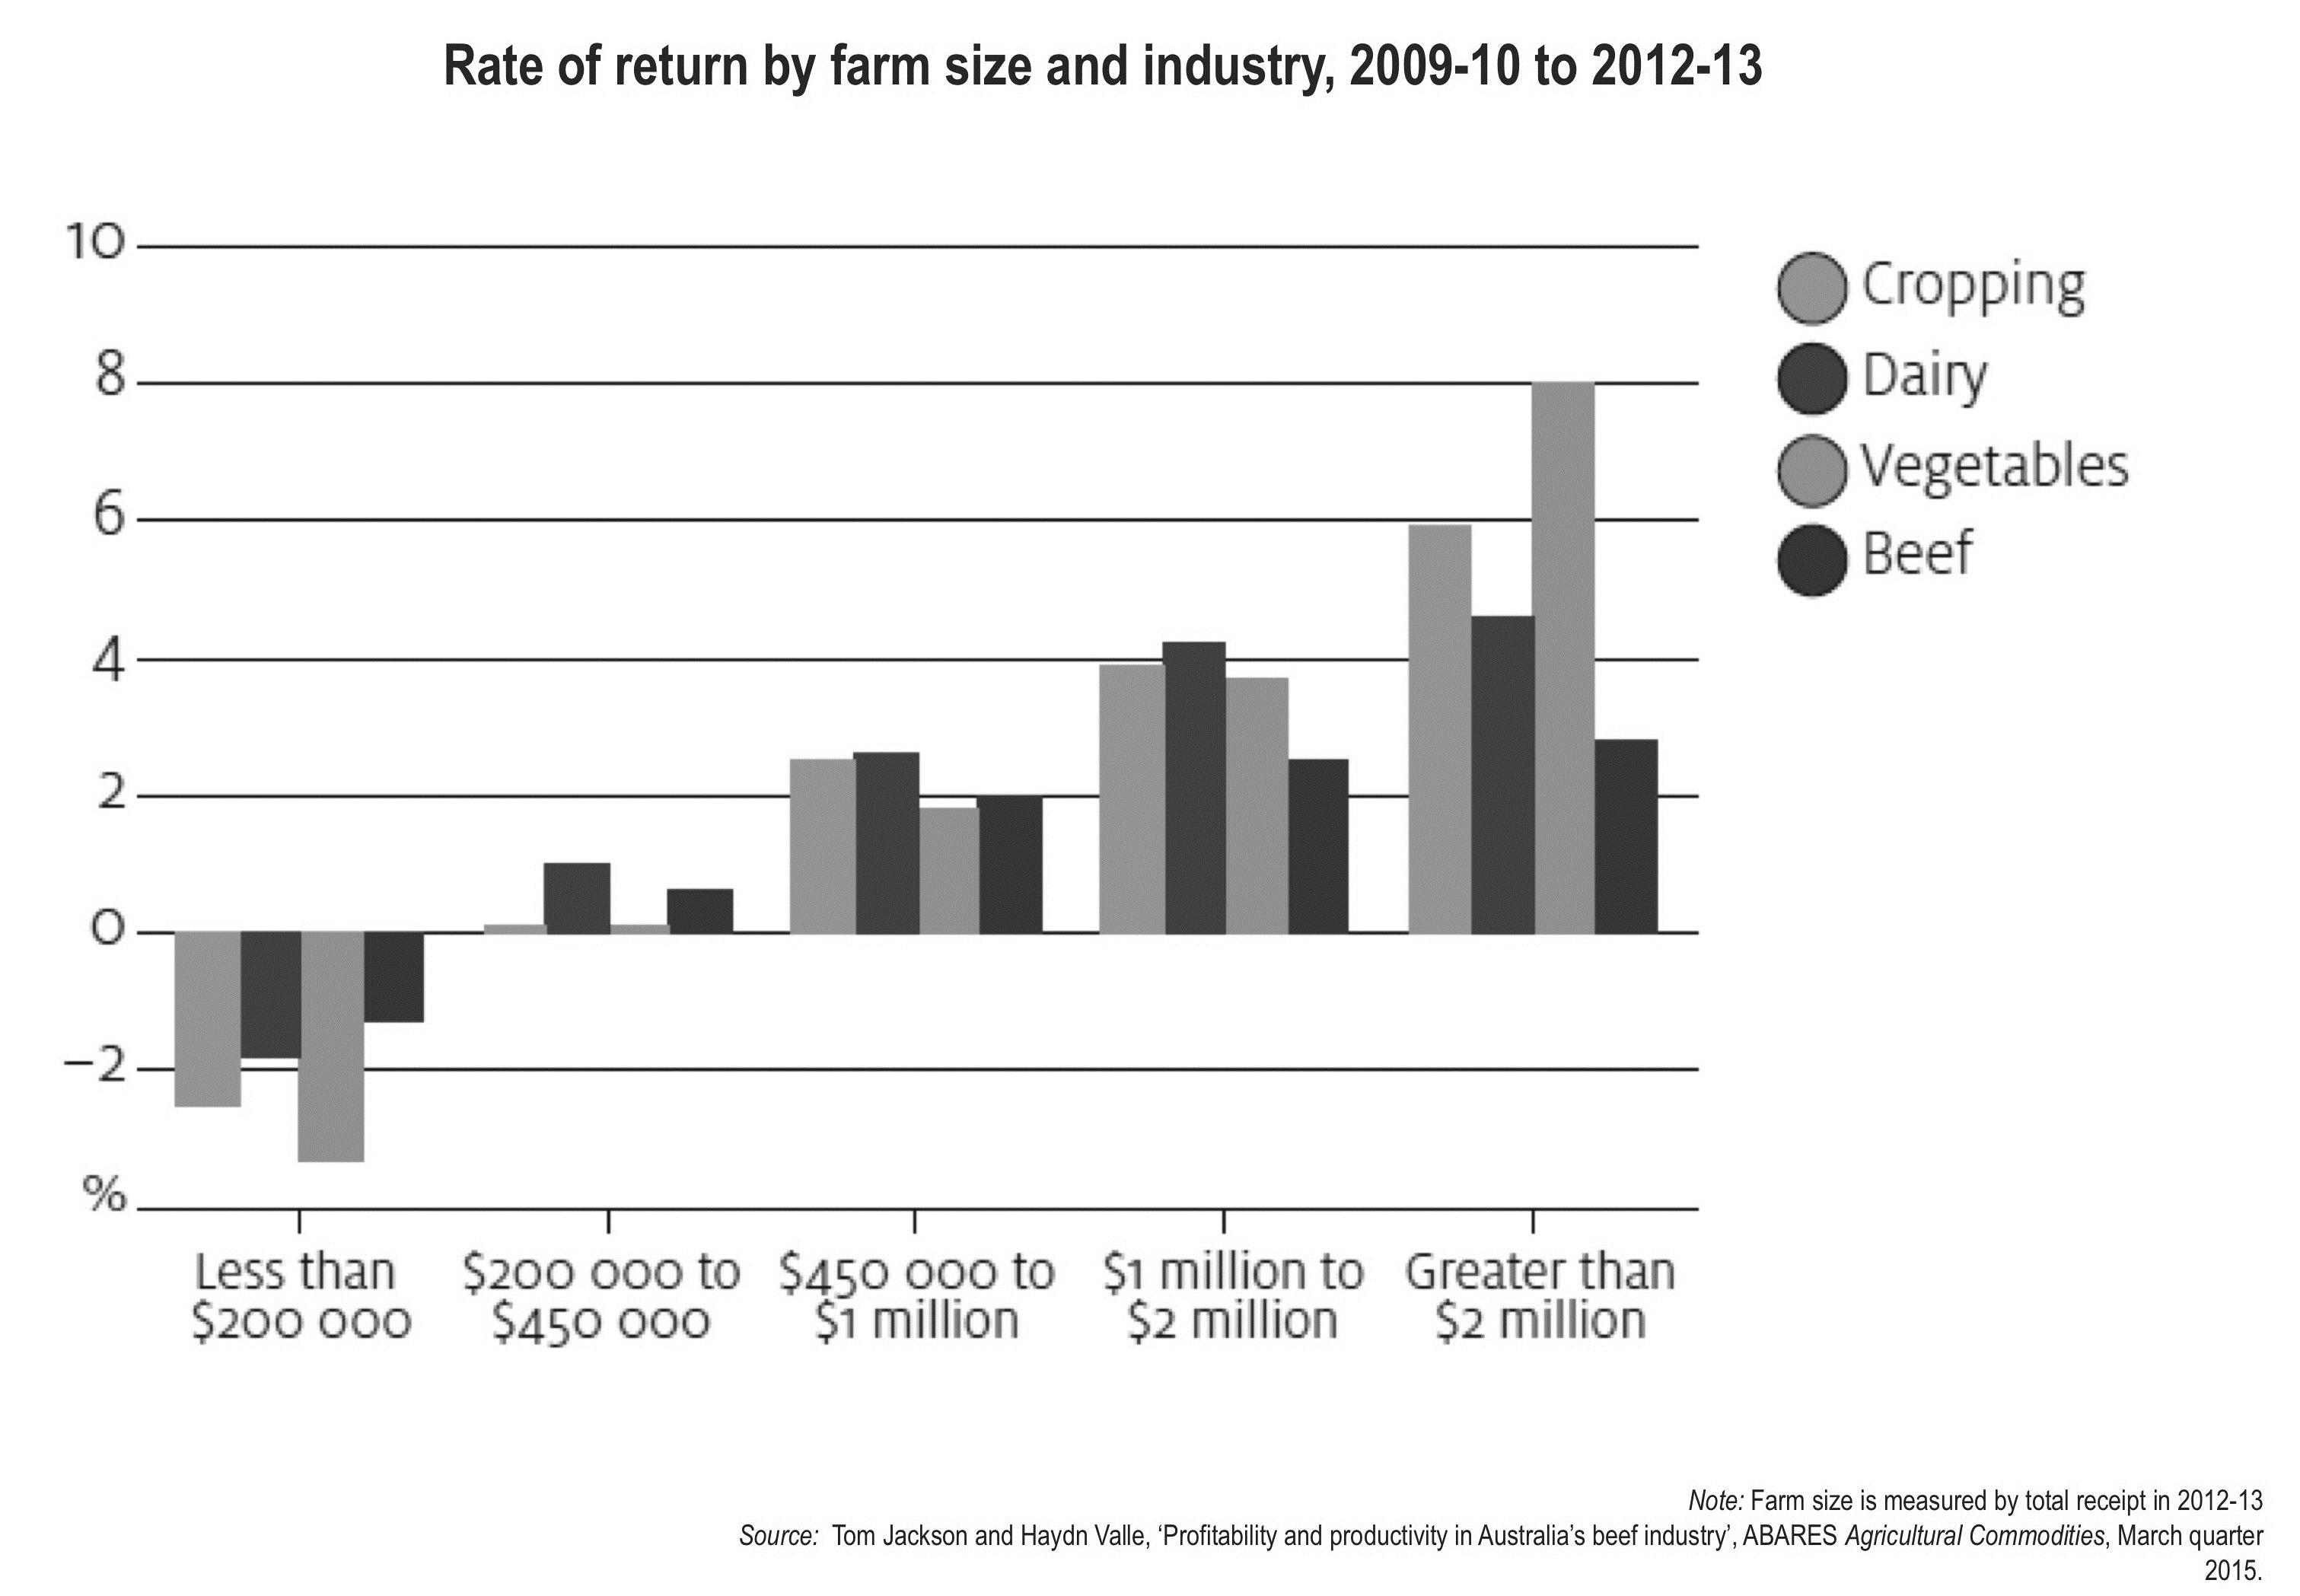 Figure 35: Rate of return by farm size and industry, 2009-10 to 2012-13.